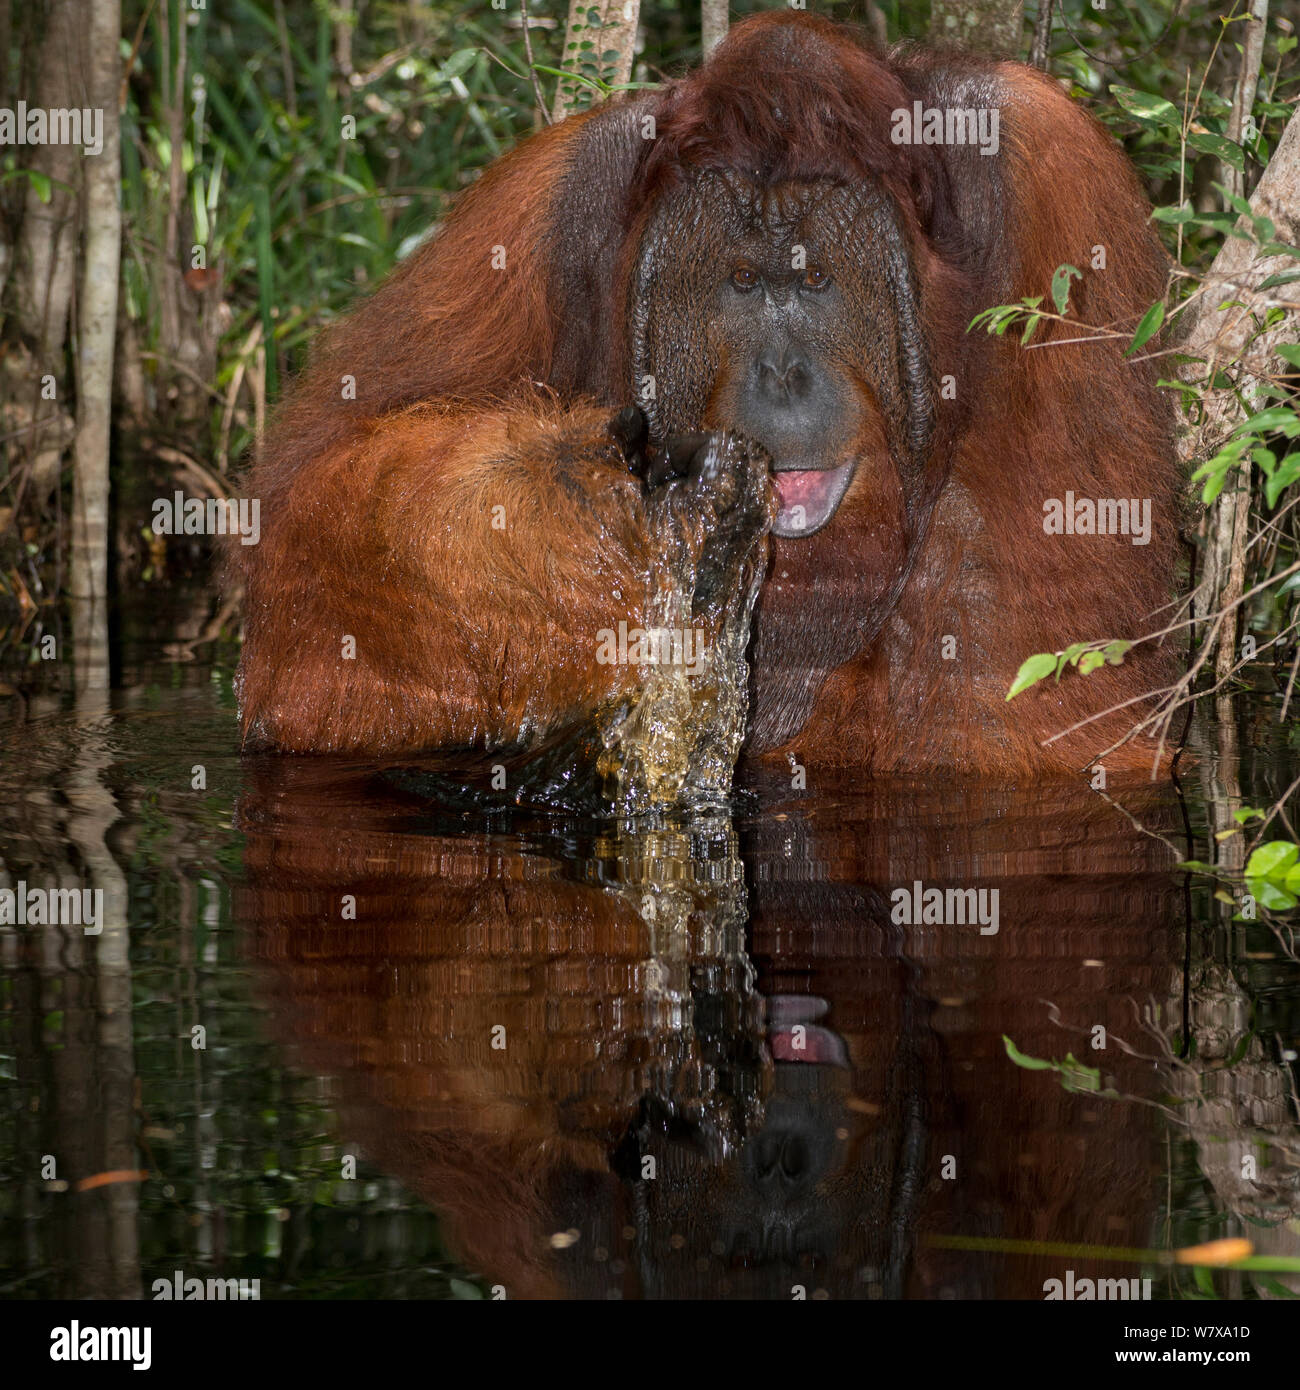 Bornean Orangutan (Pongo pygmaeus) male sitting in water, using hand to drink, Camp Leakey, Tanjung Puting National Park, Central Kalimantan, Borneo, Indonesia. Sequence 2 of 2. Stock Photo